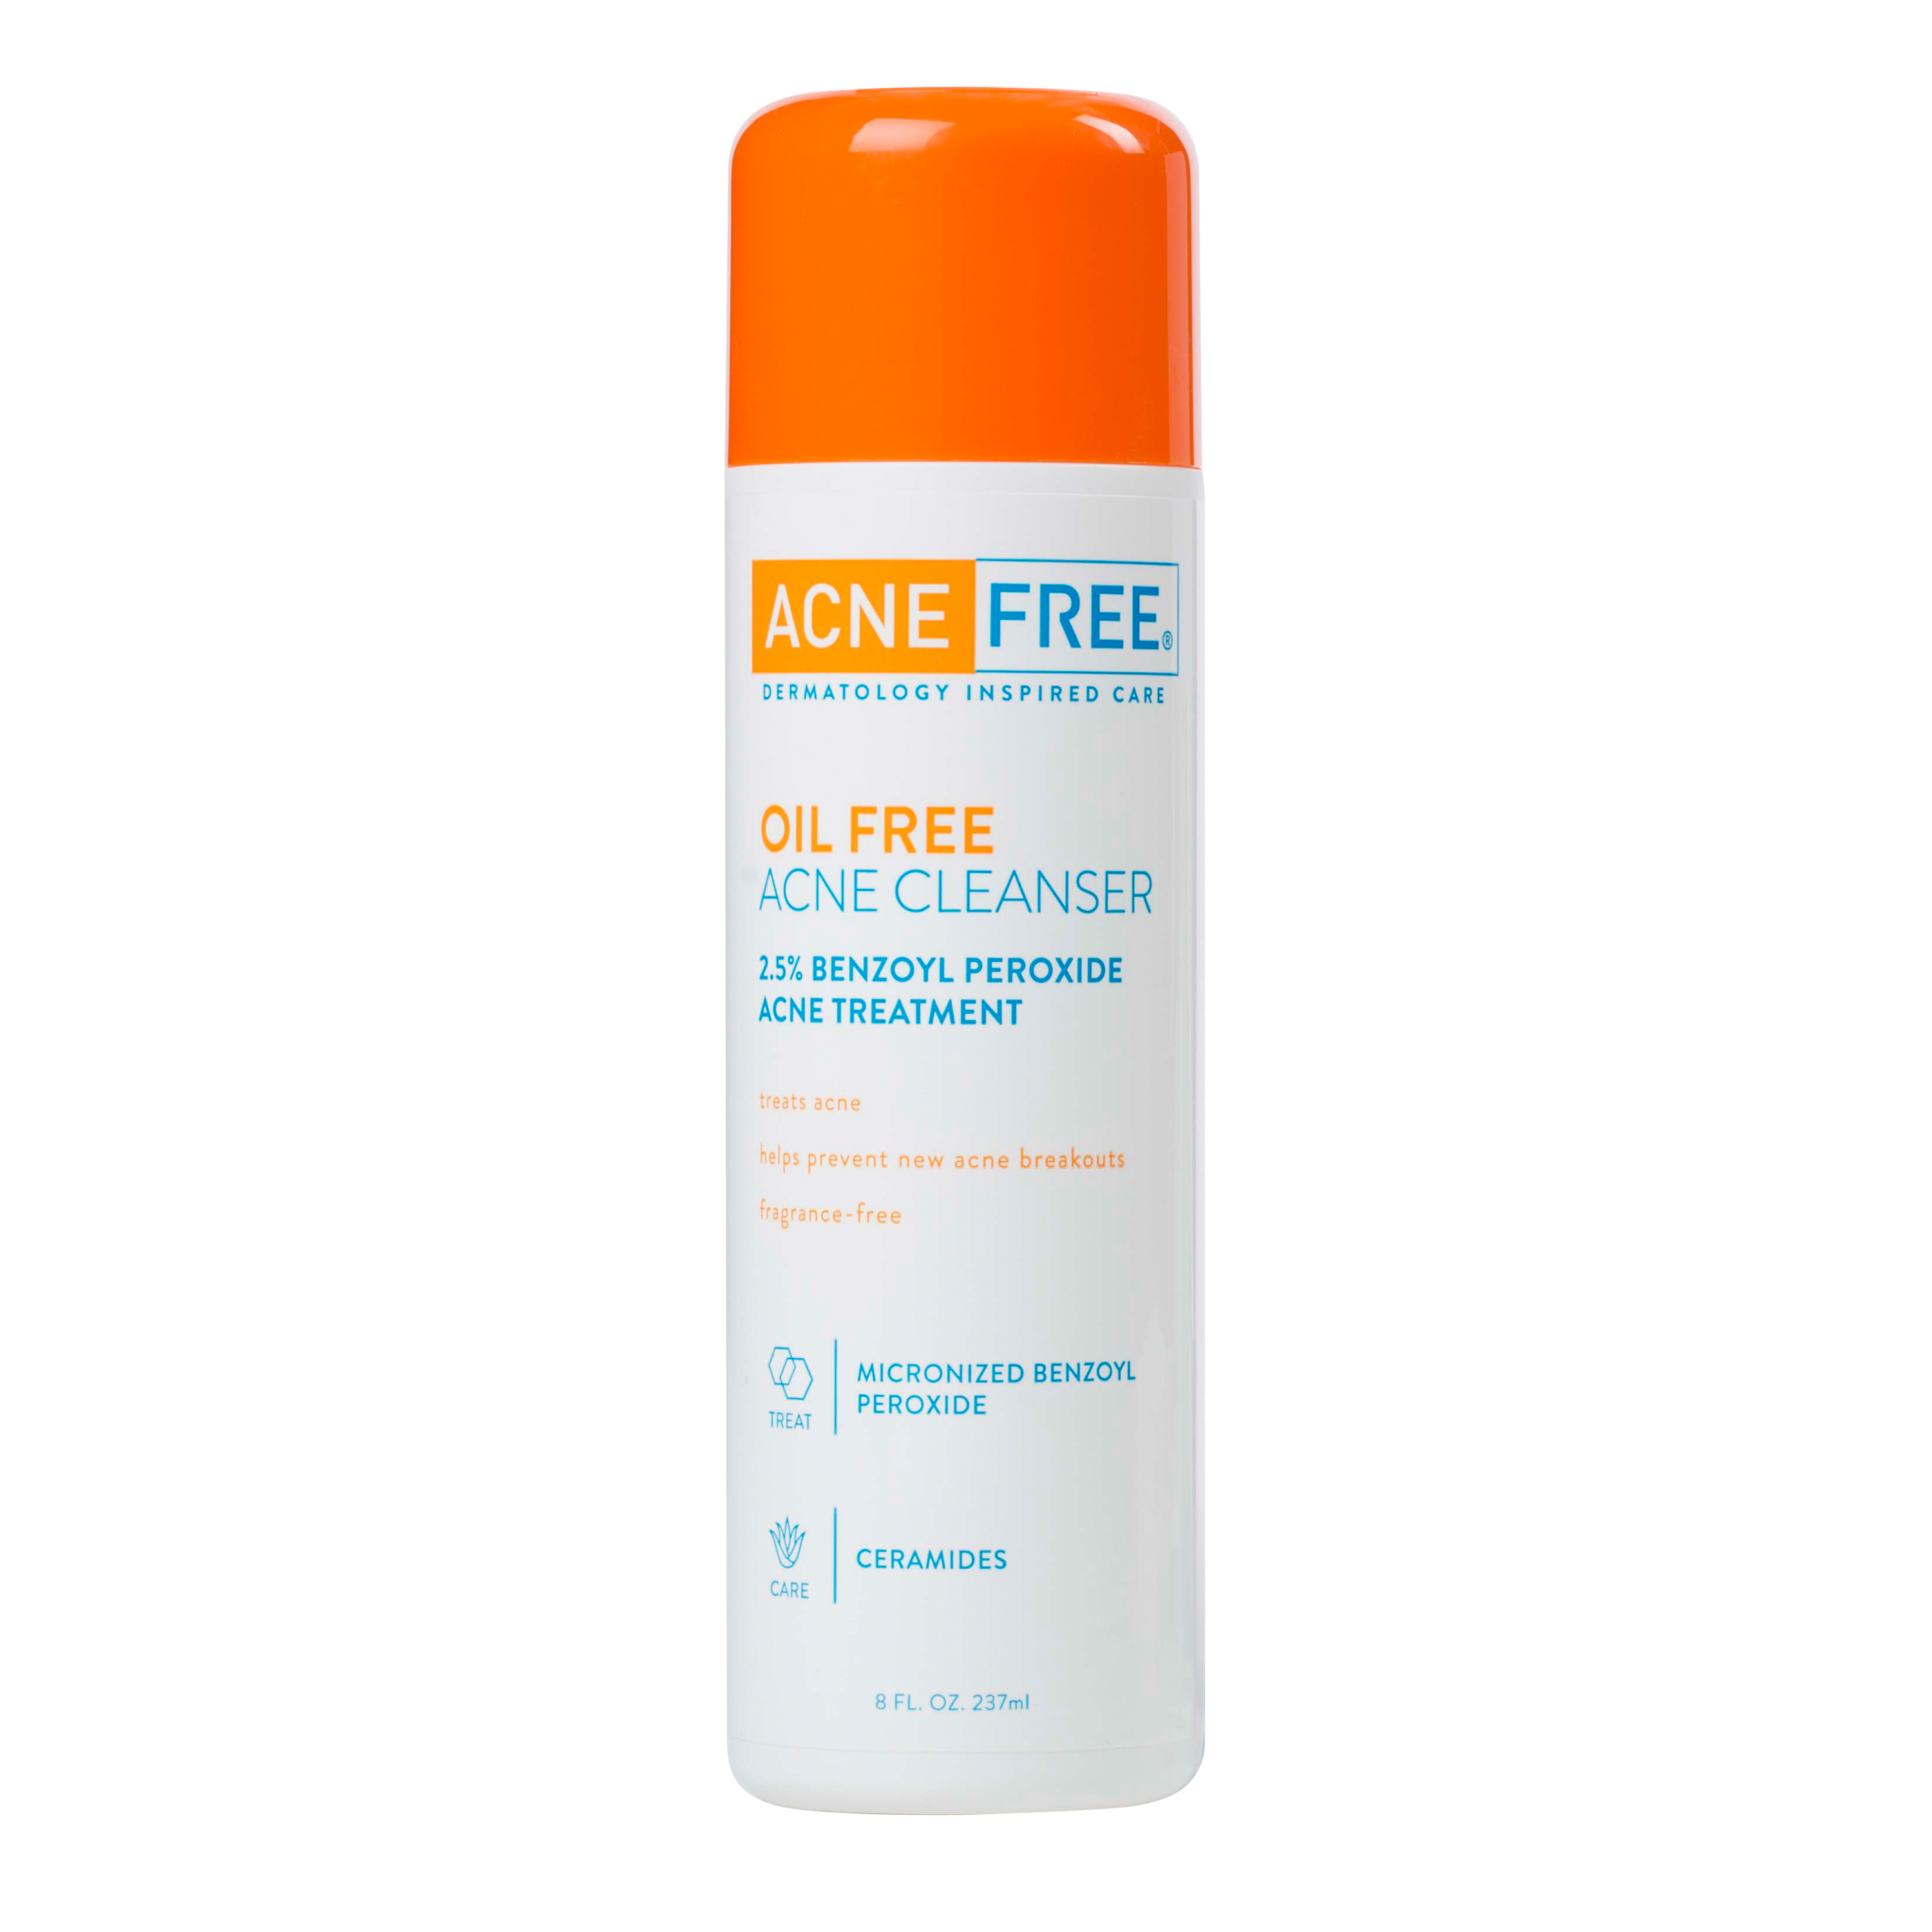 AcneFree Oil Free Acne Cleanser with 2.5% Benzoyl Peroxide, 8 oz - image 1 of 14